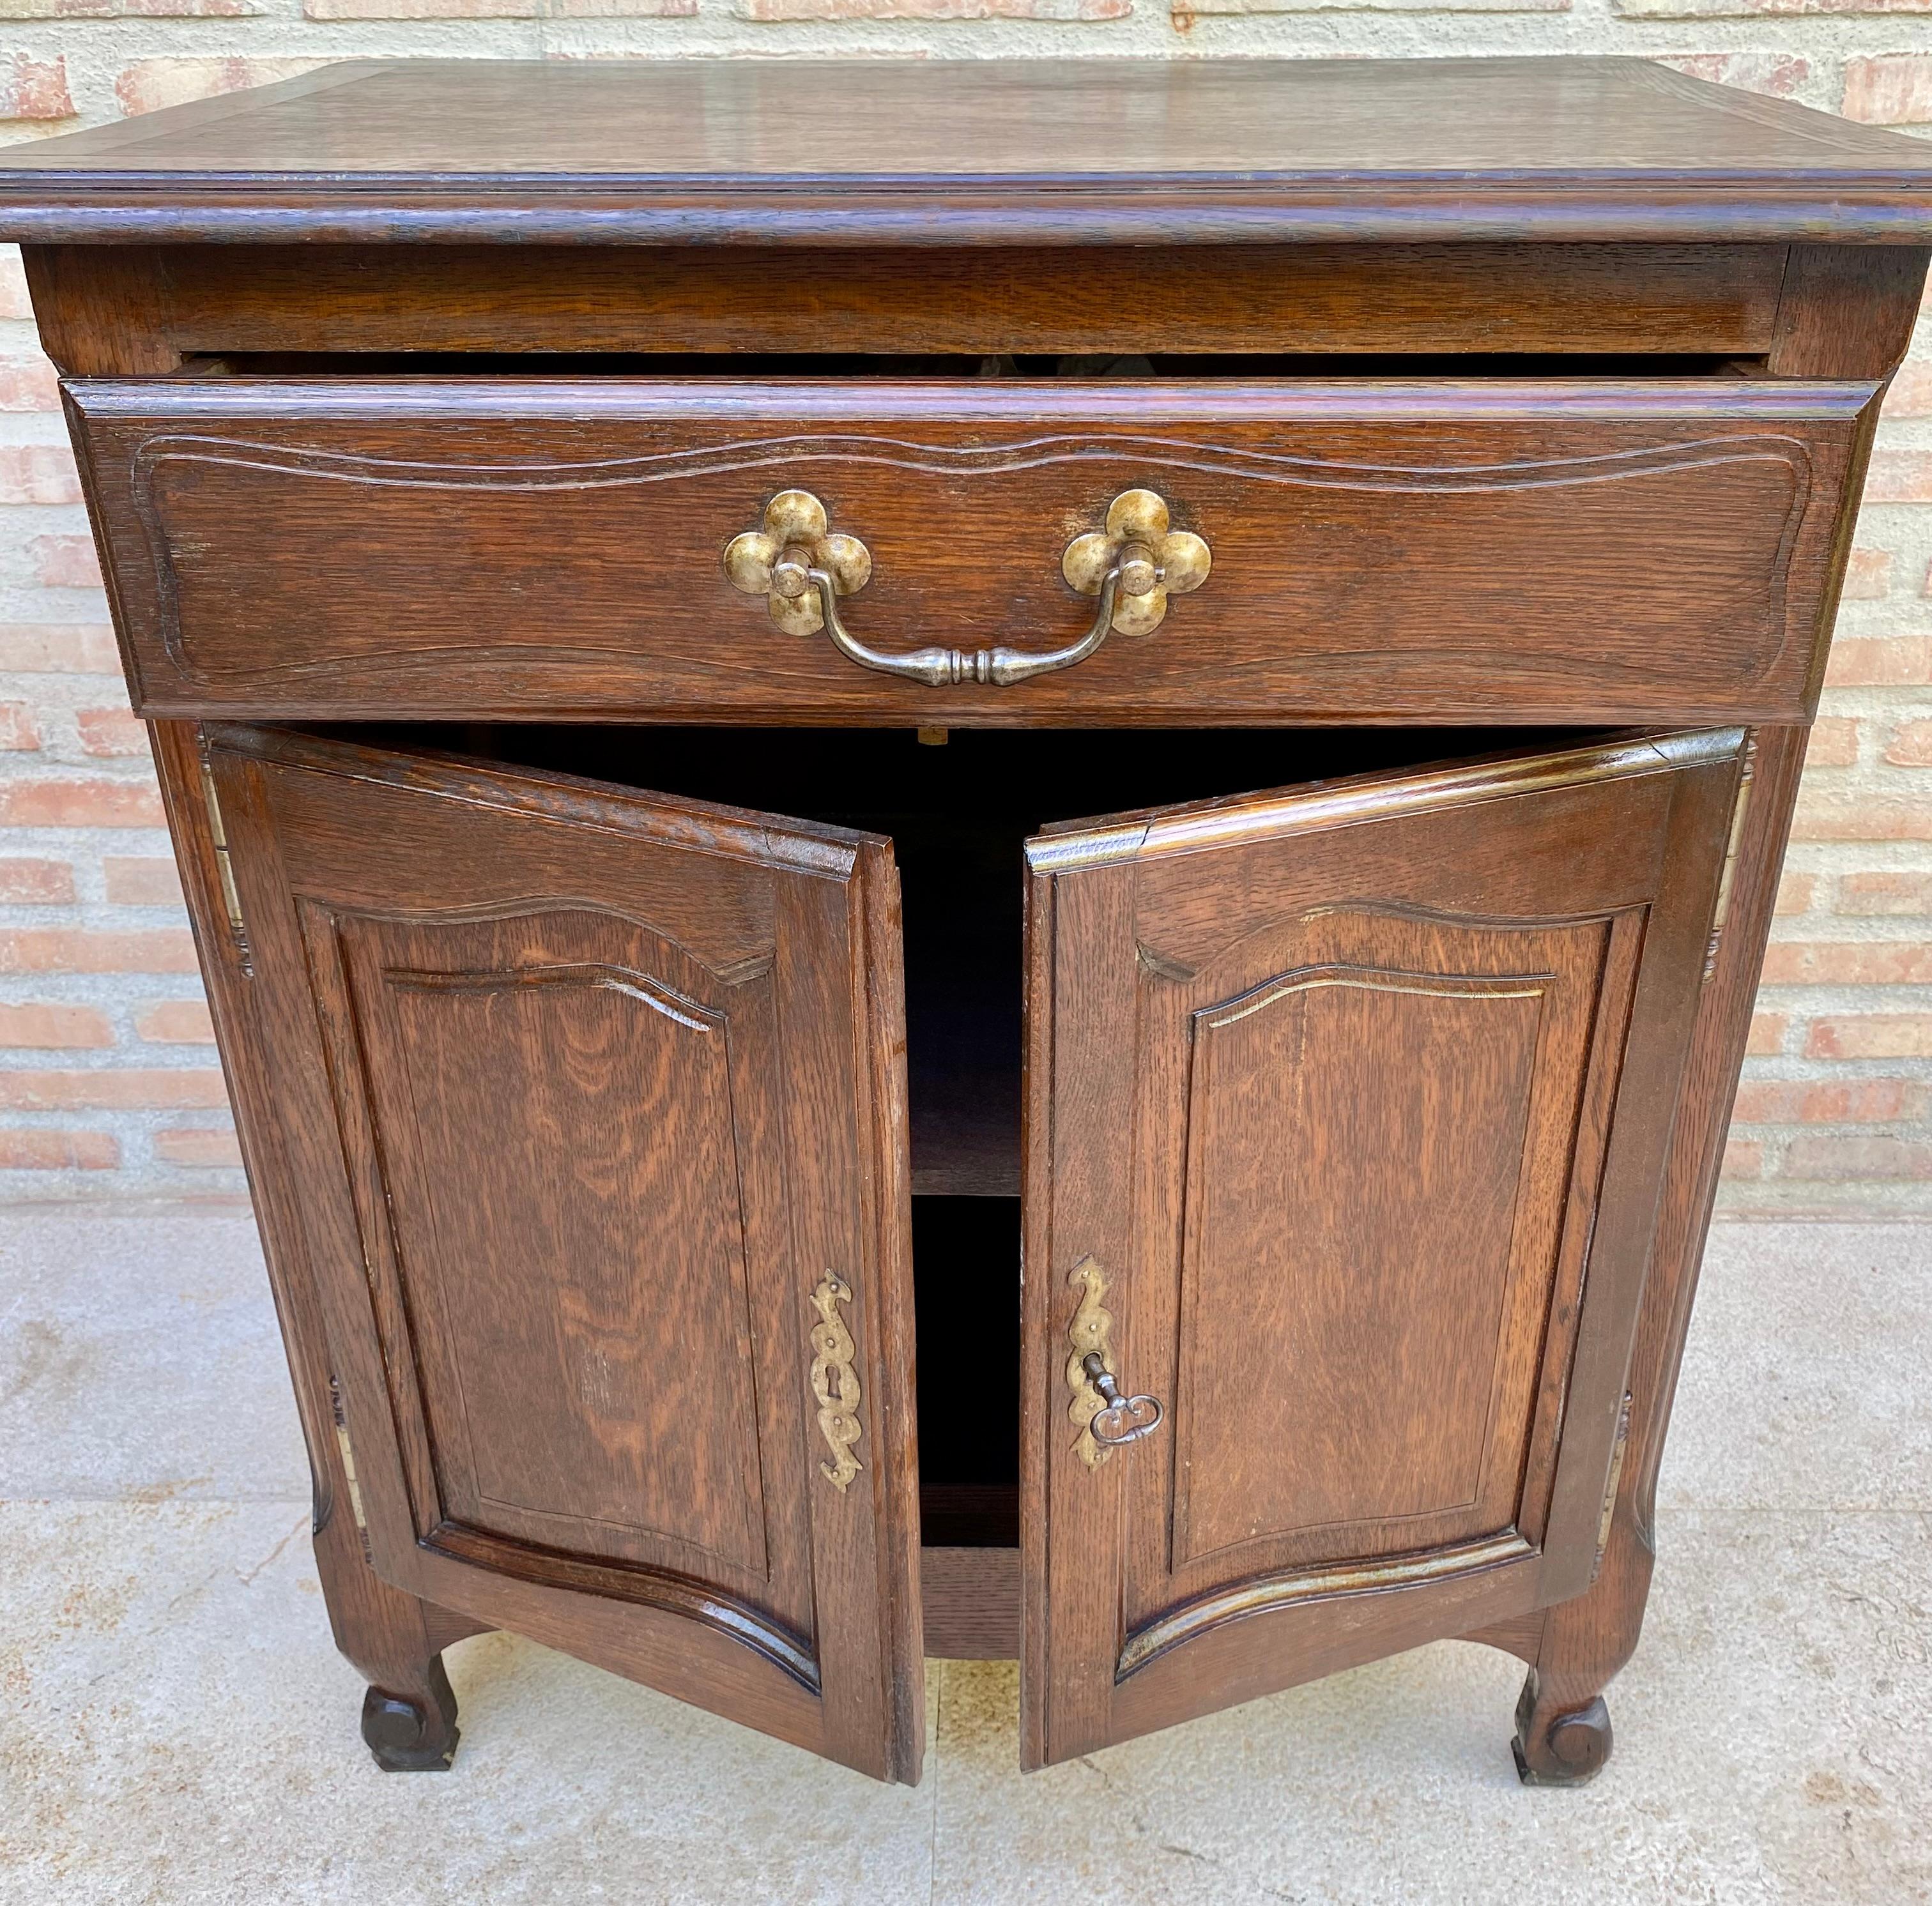 Mid-Century French Walnut Side Table with One Drawer and Double Door, 1950s For Sale 2